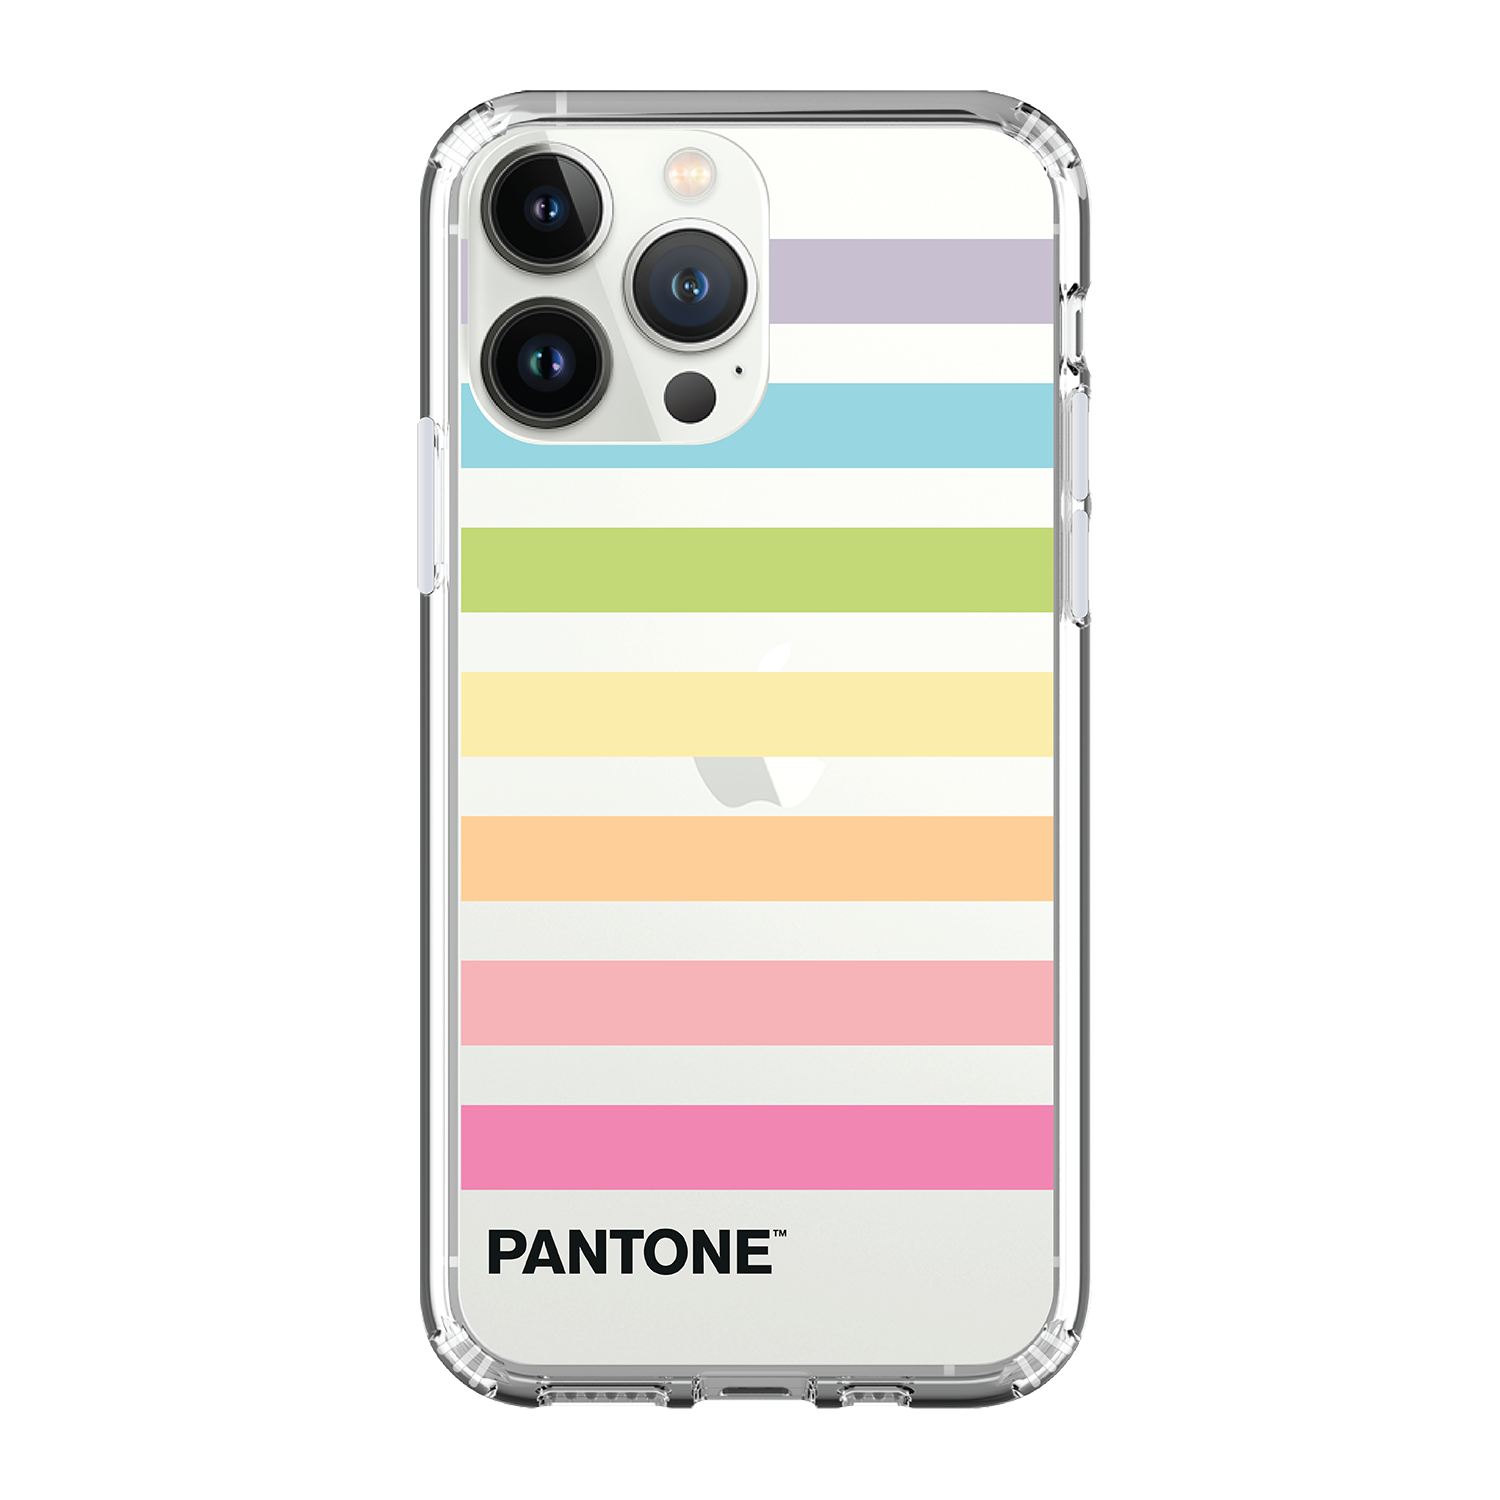 PANTONE Clear Case / iPhone Case / Android Case / Samsung Case 正版授權 全包邊氣囊防撞手機殼 (PE07)